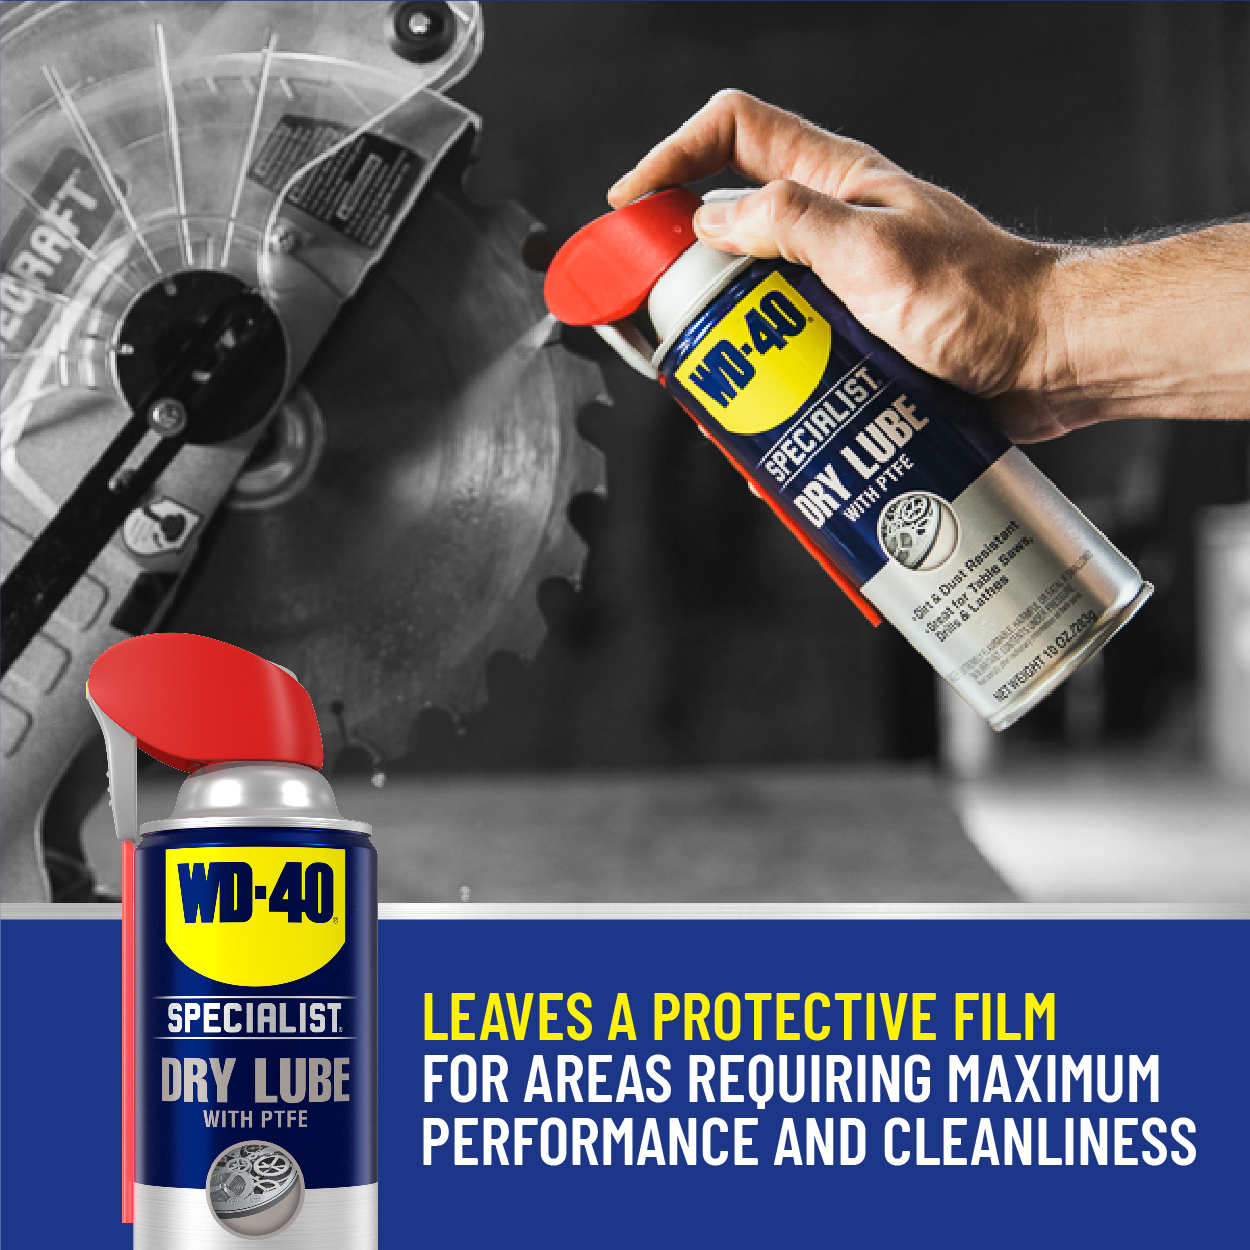 WD-40 Specialist Dry Lube with PTFE, Lubricant with Smart Straw Spray, 10 oz - image 4 of 9